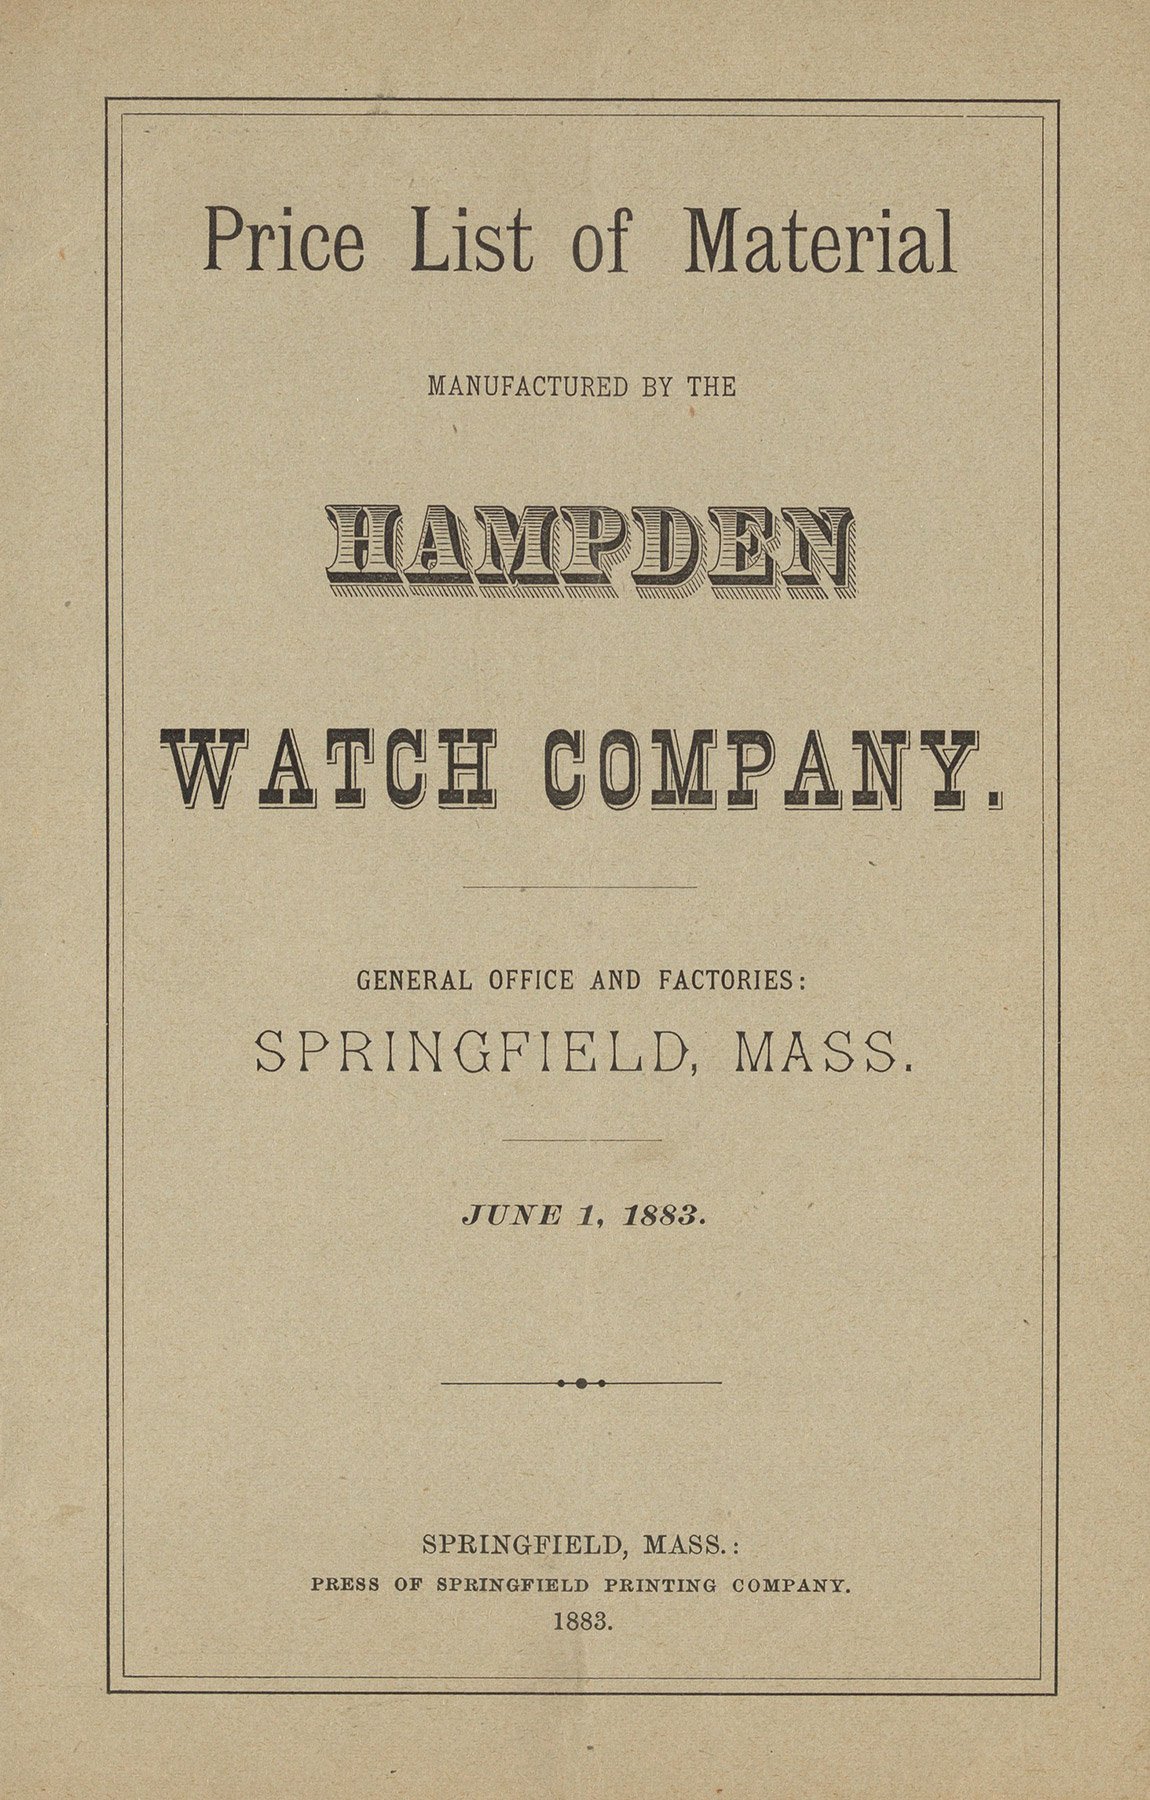 Hampden Watch Co. Material Catalog Price List (1883) Cover Image